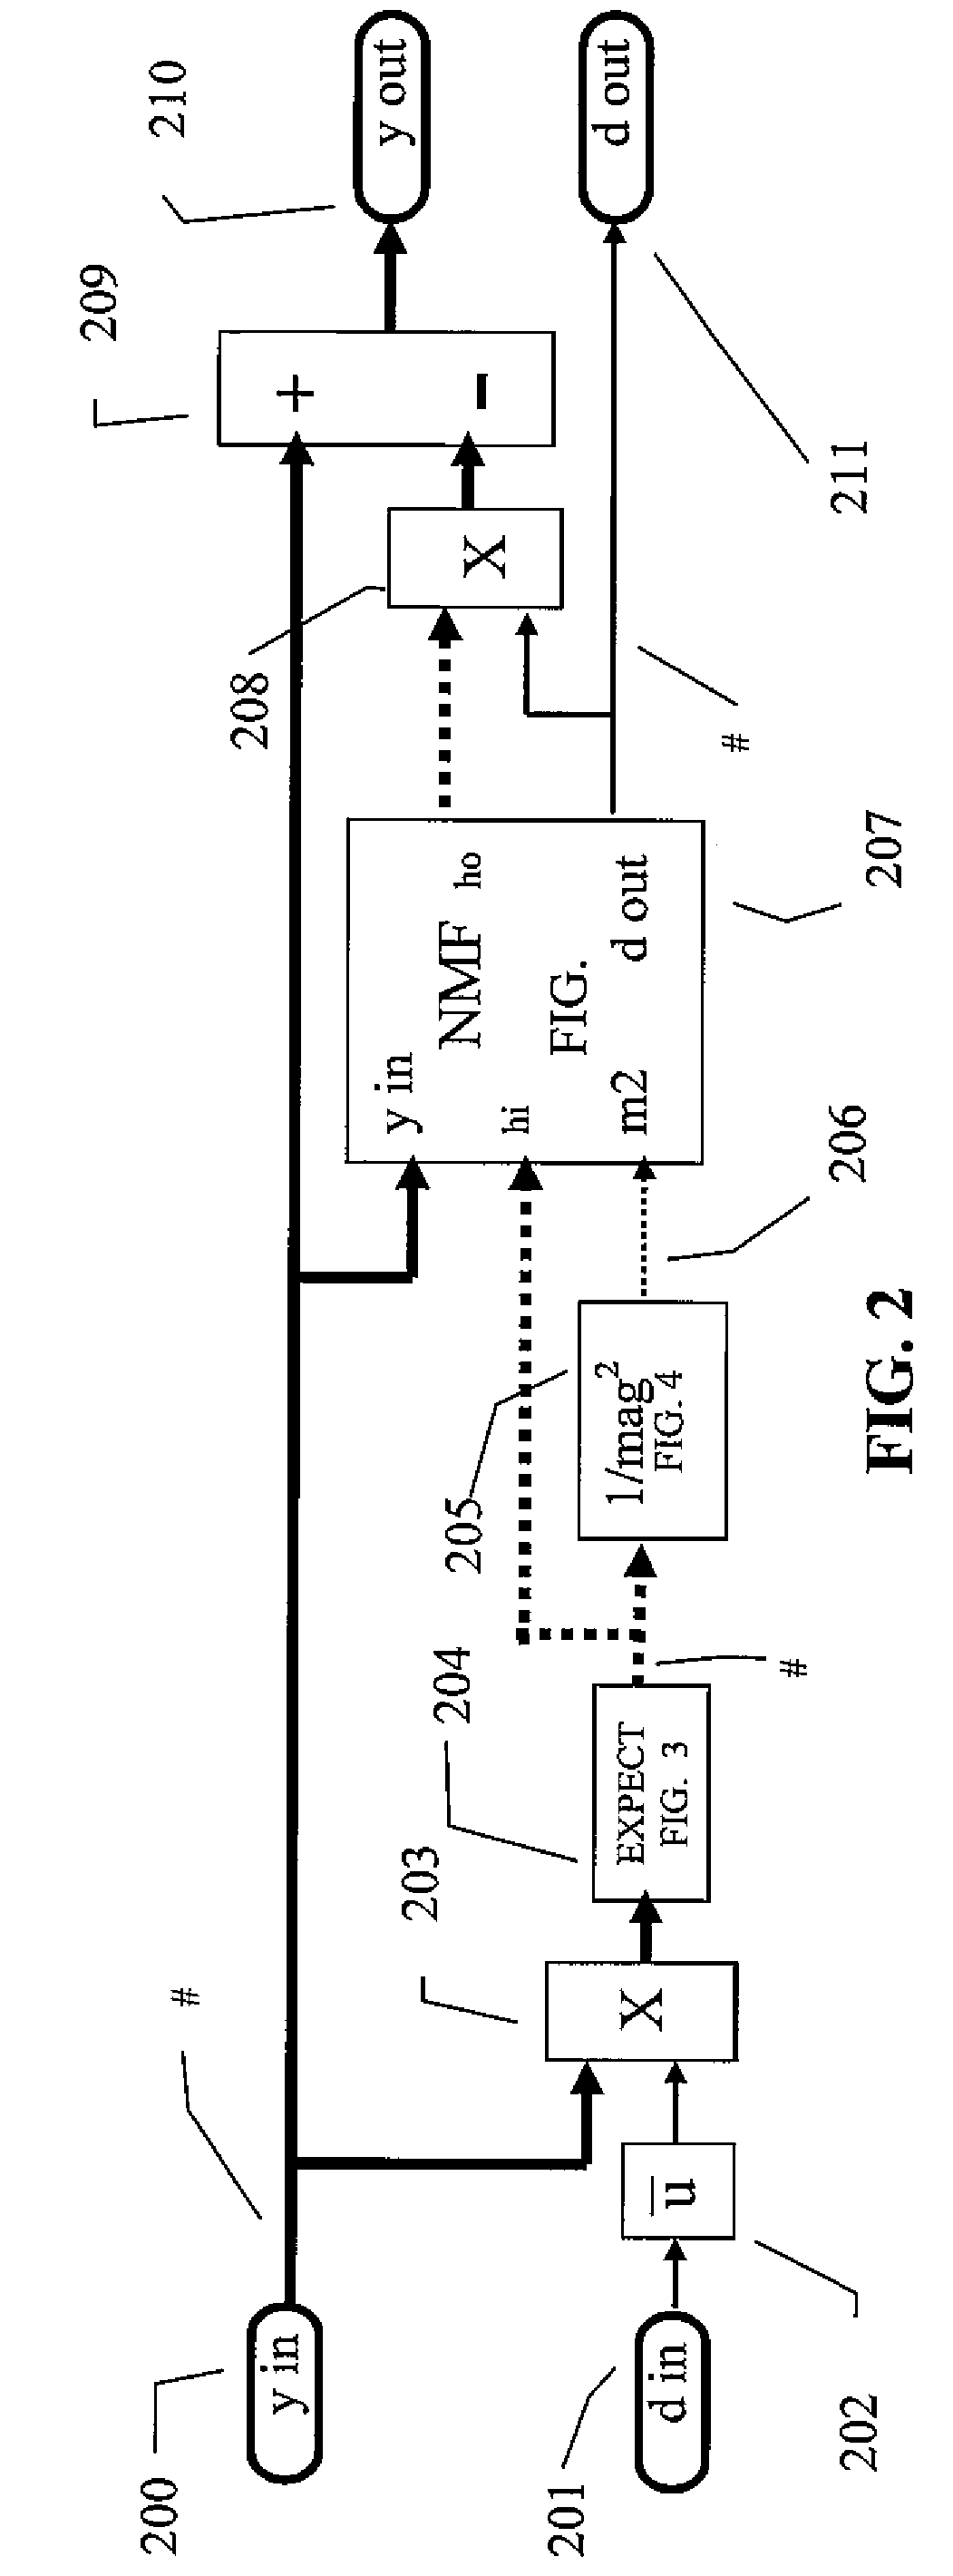 Reduced complexity adaptive multistage wiener filter